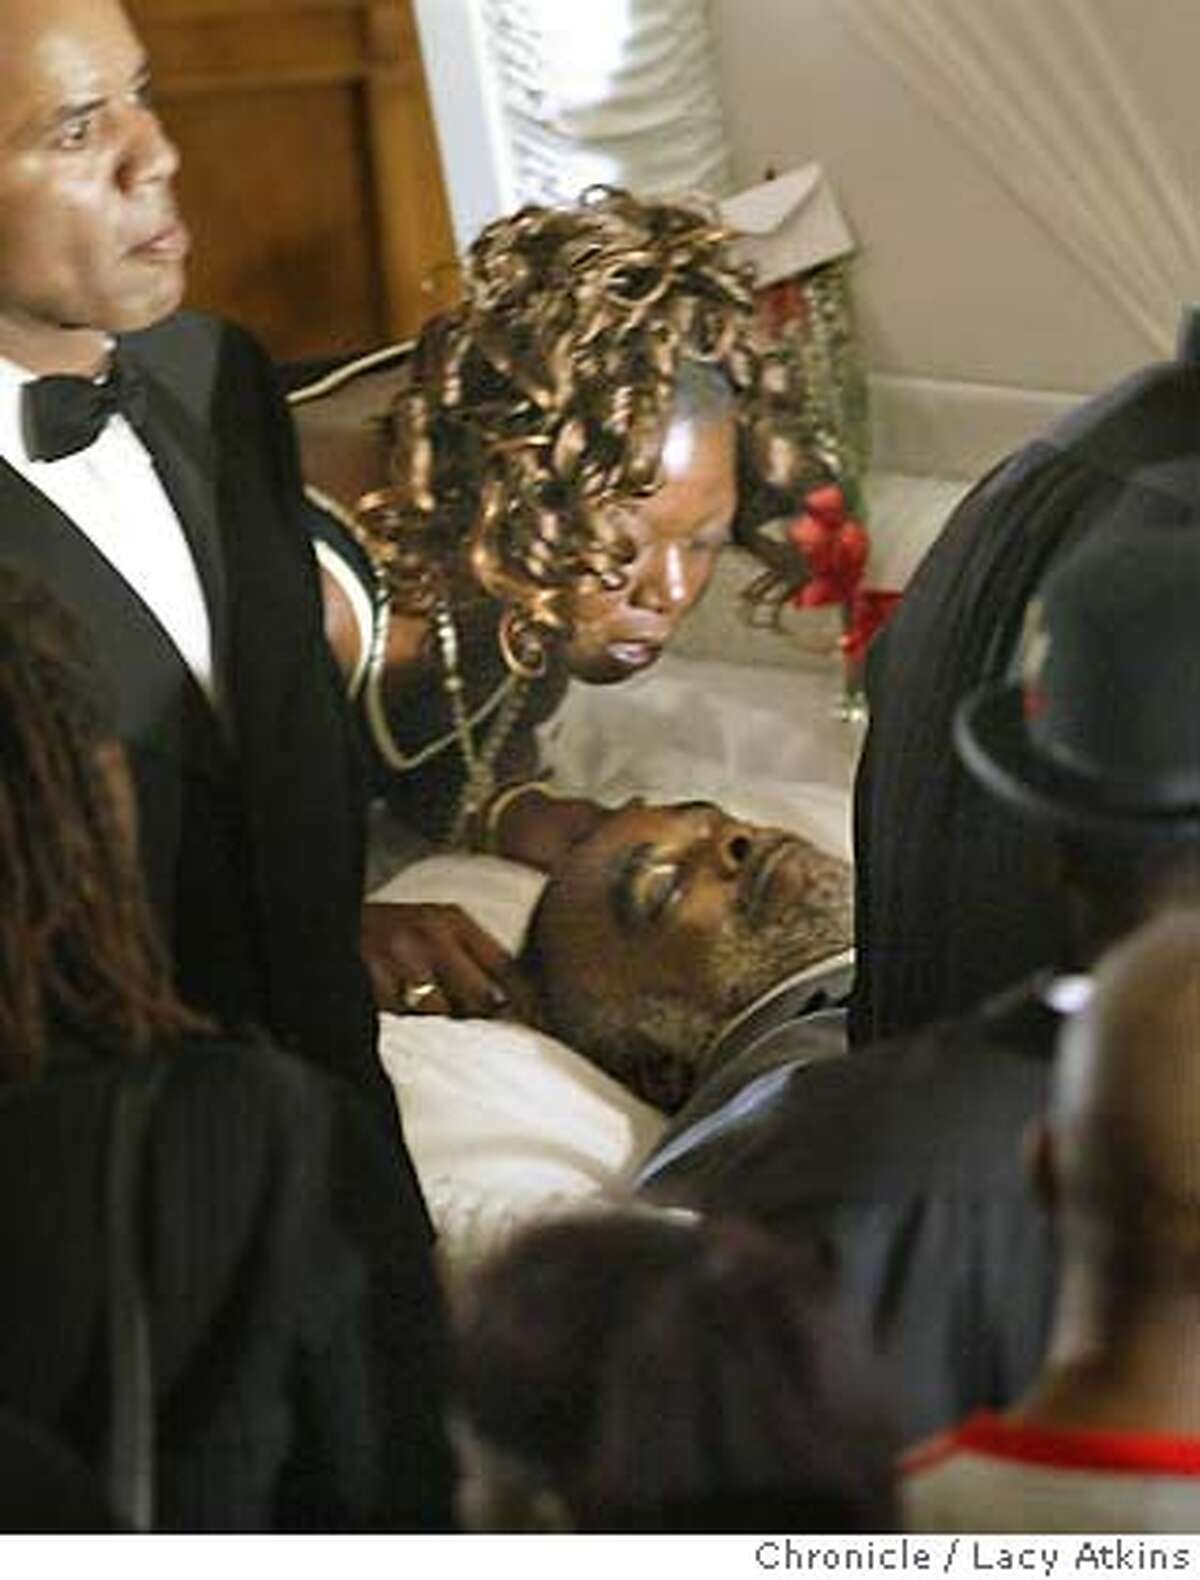 D'Metri Holiwell , sister of Stanley Tookie Williams leans over his body at his funeral in Los Angeles, Dec. 20, 2005. Funeral for Stanley Tookie Williams at the Bethel Church in Los Angeles, Dec. 20, 2005 Photo By Lacy Atkins